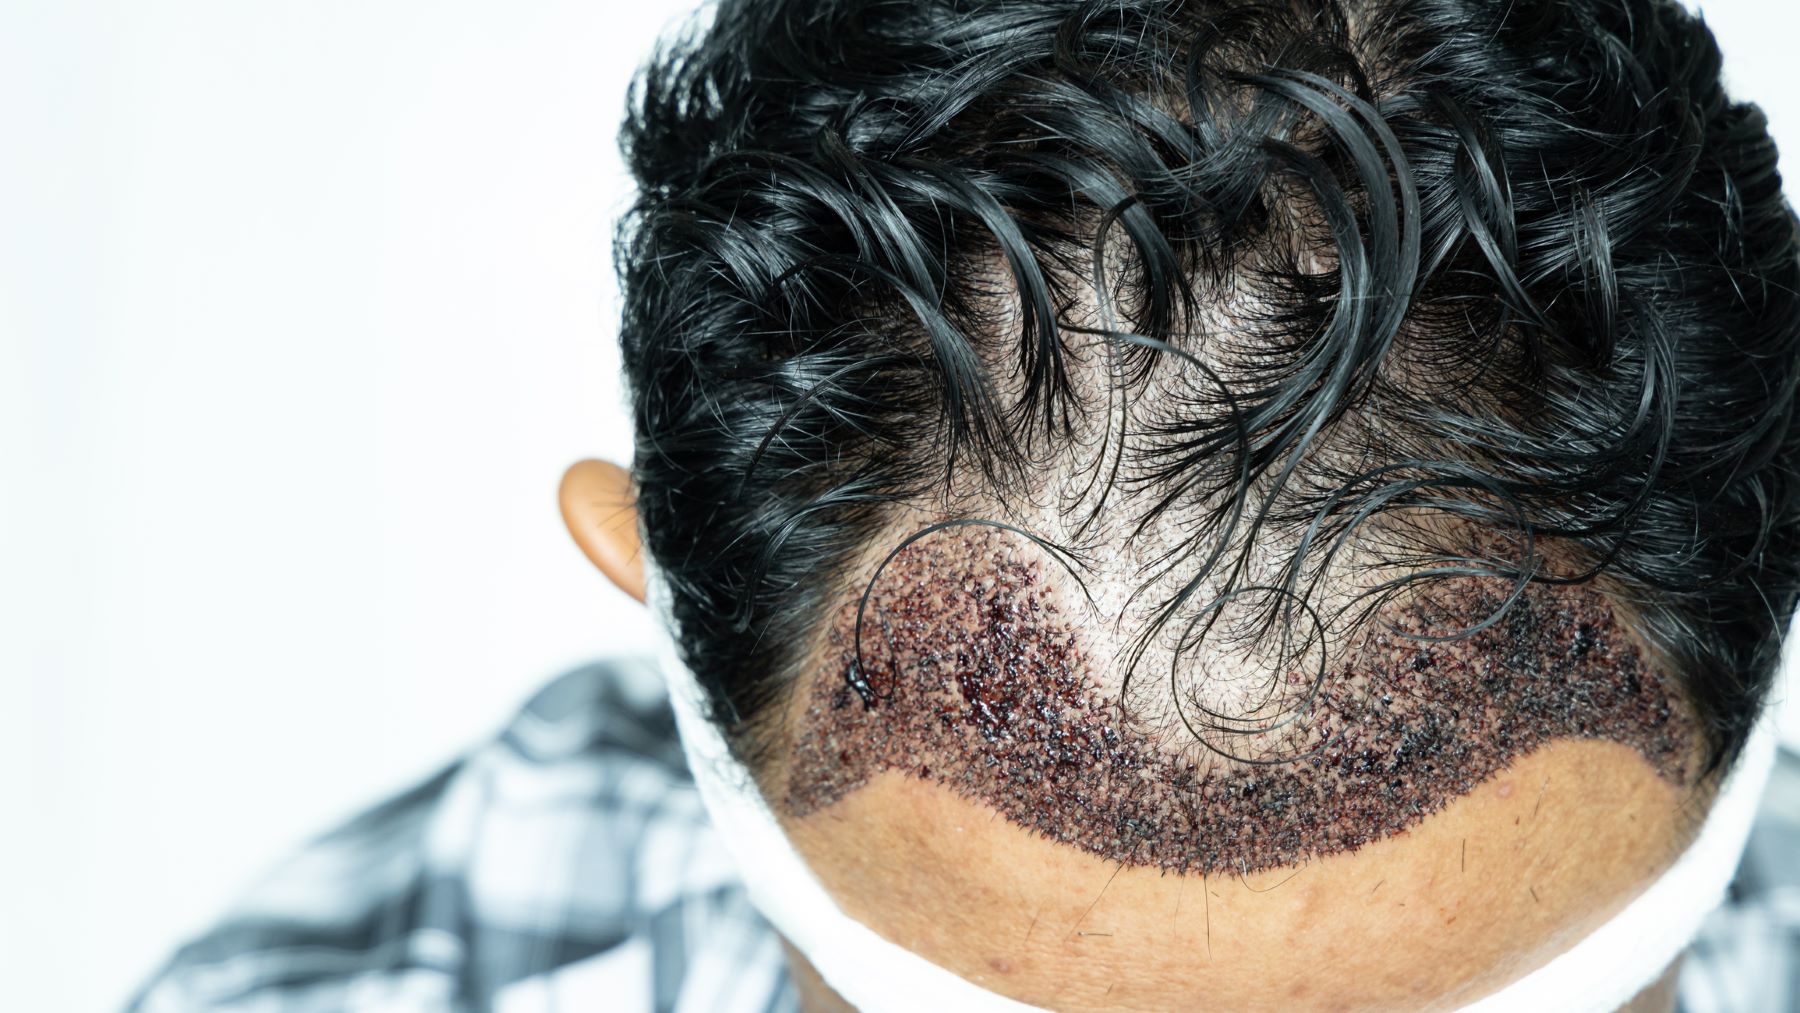 Hair transplant recovery process